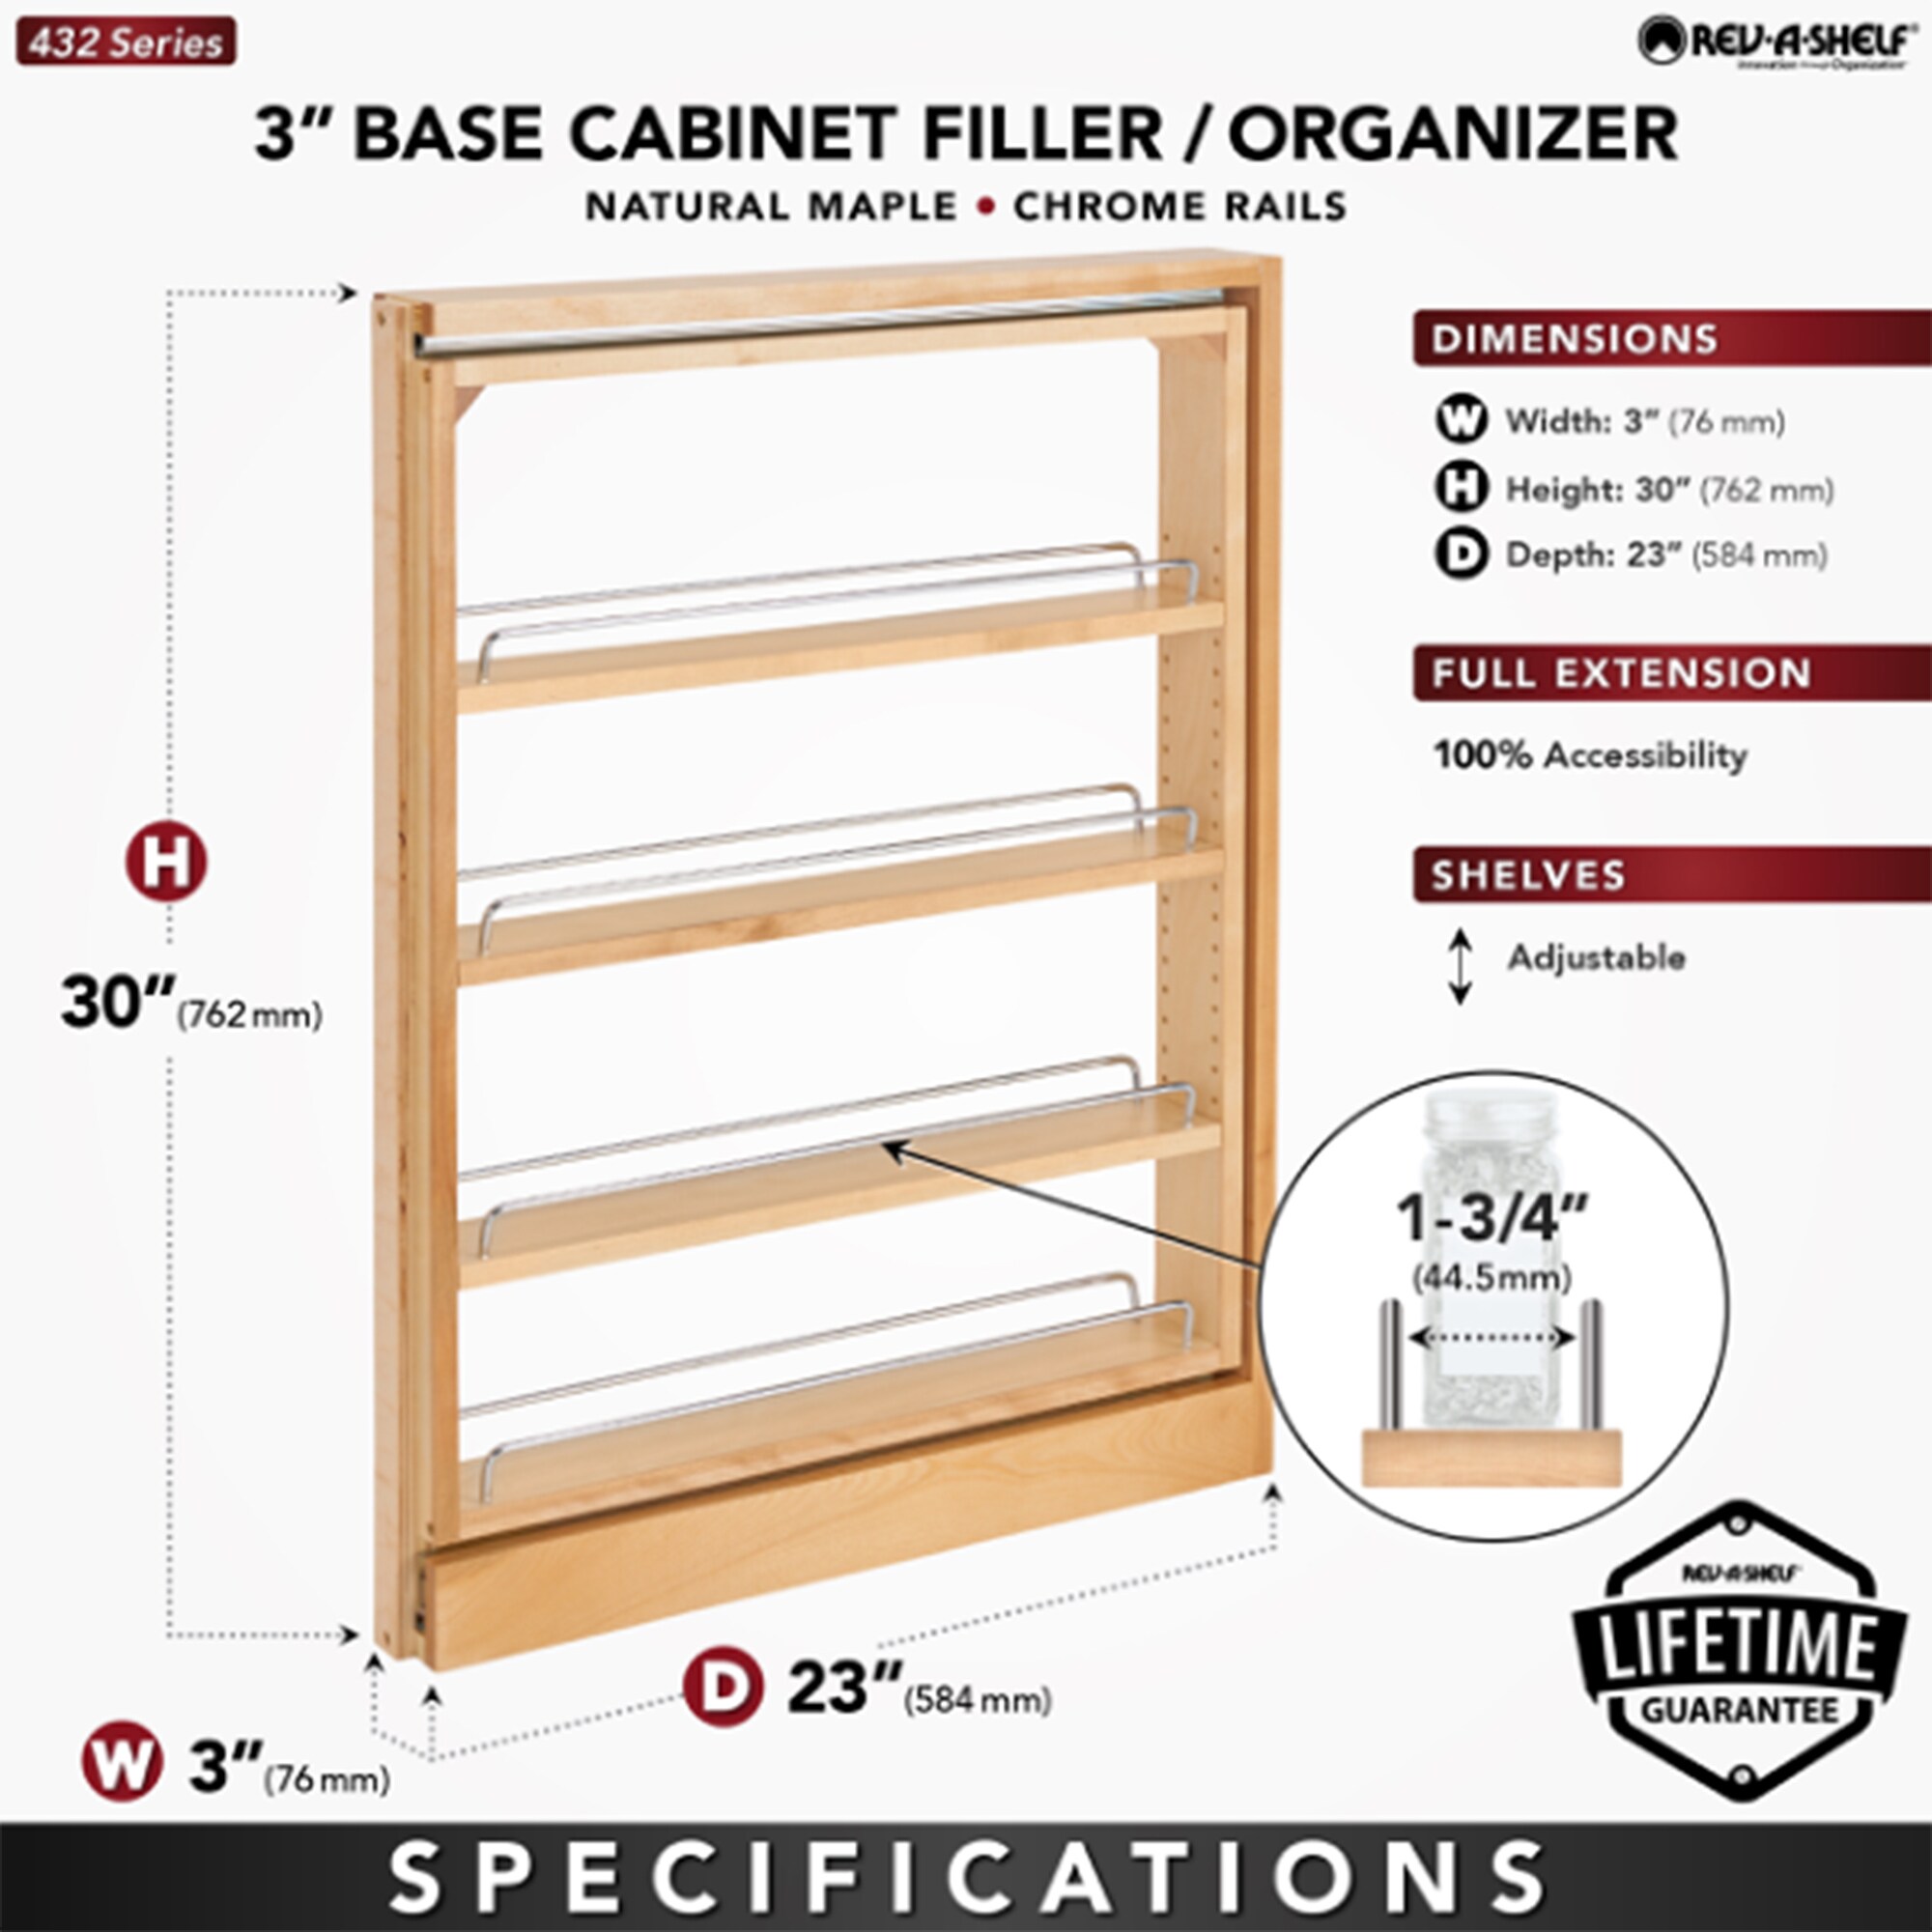 Thin Spice Cabinet ideas? Depth about 10 inches, width about 9, shelves can  be easily removed. Can't find a thin, tiered organizer. Suggestions? : r/ organization